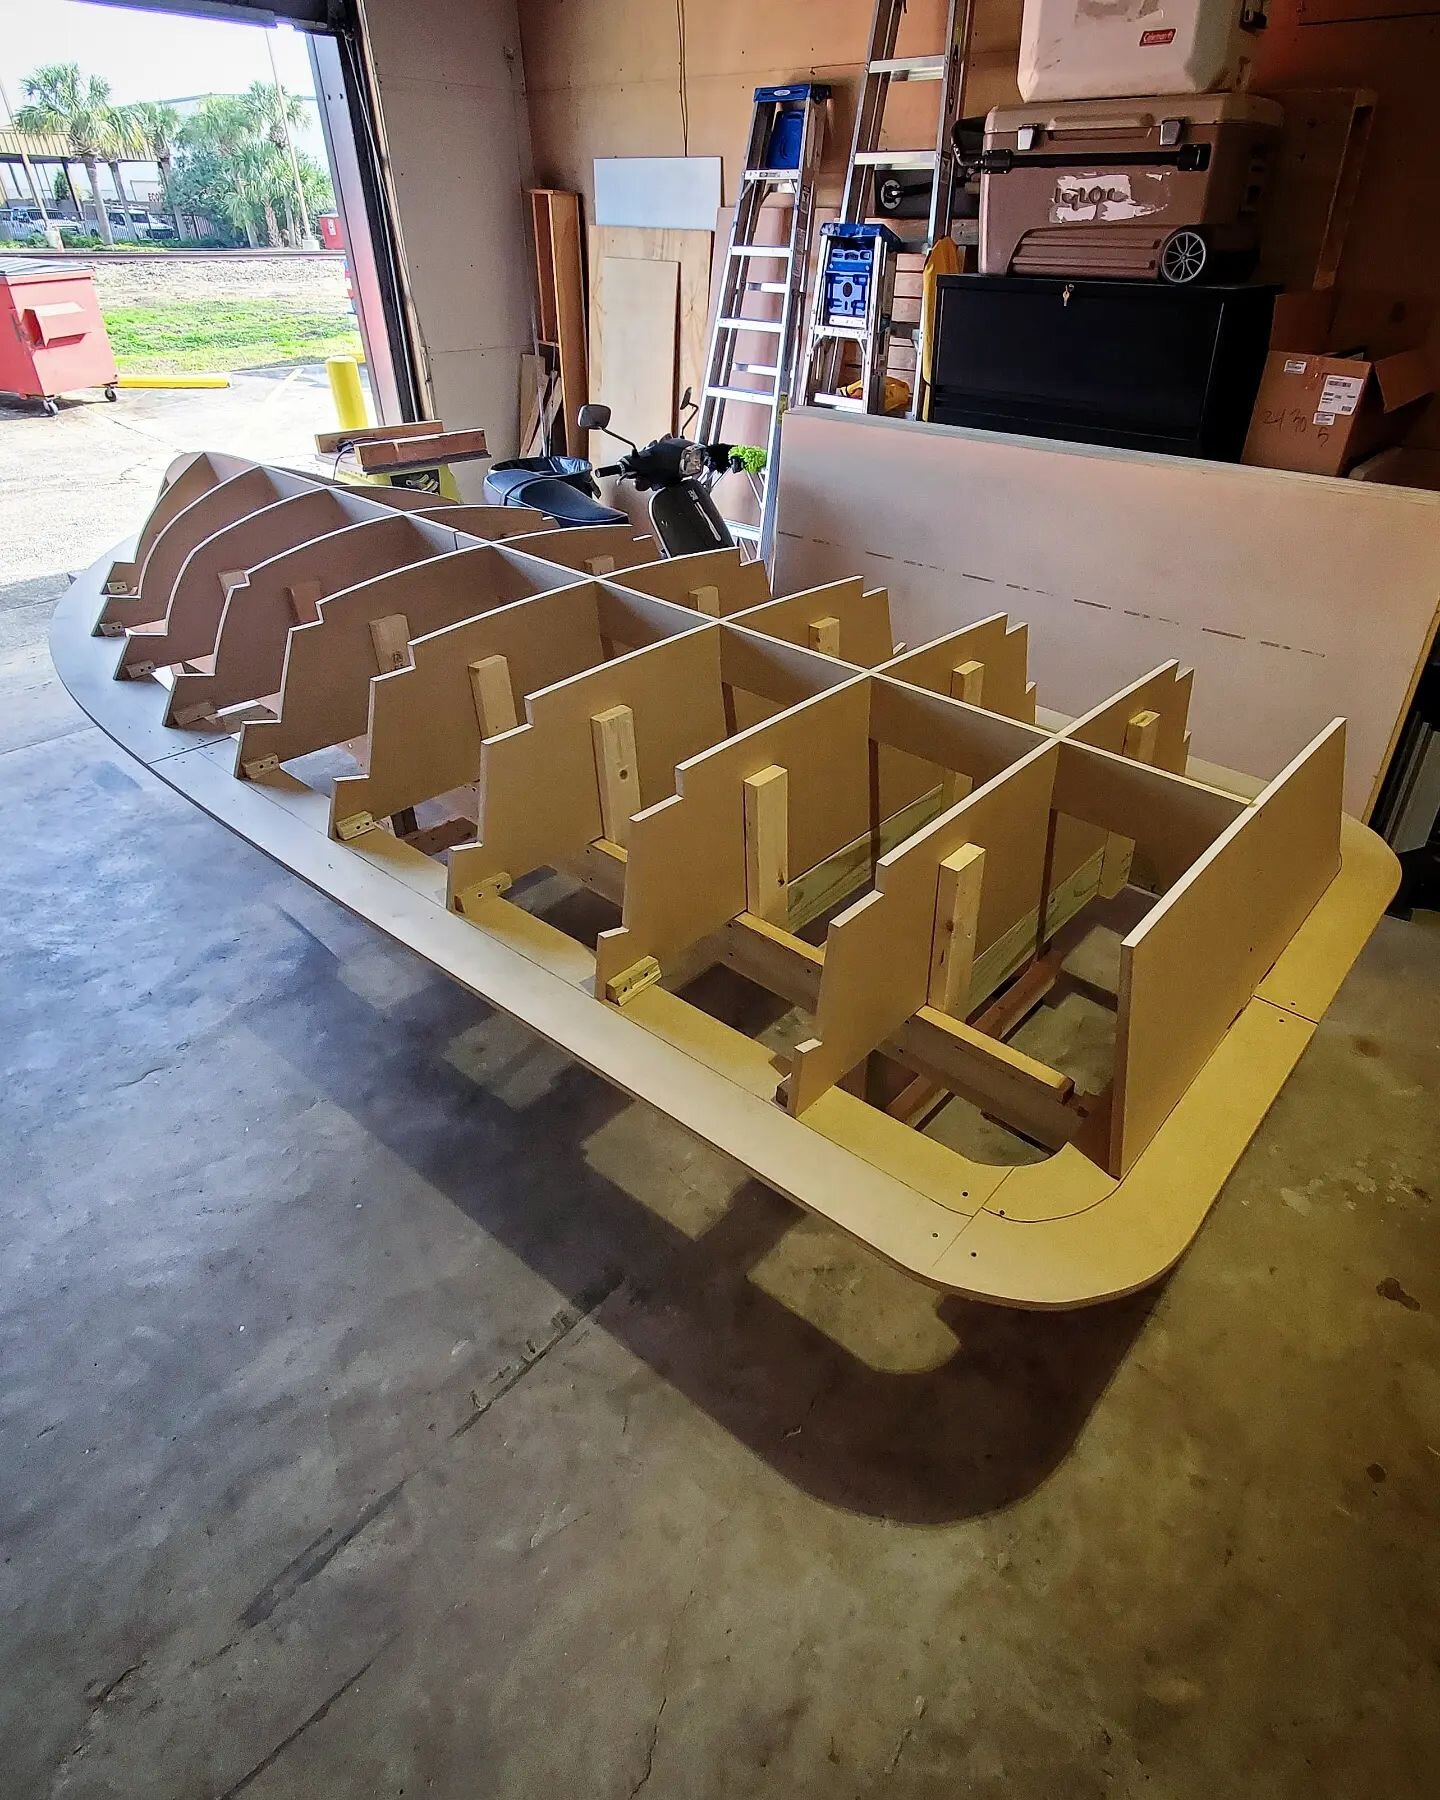 I have been building a flats skiff over the past 6 months. I know its not leather, but I think y'all may find it interesting.

It is a foam core and fiberglass build.

#conchfish16